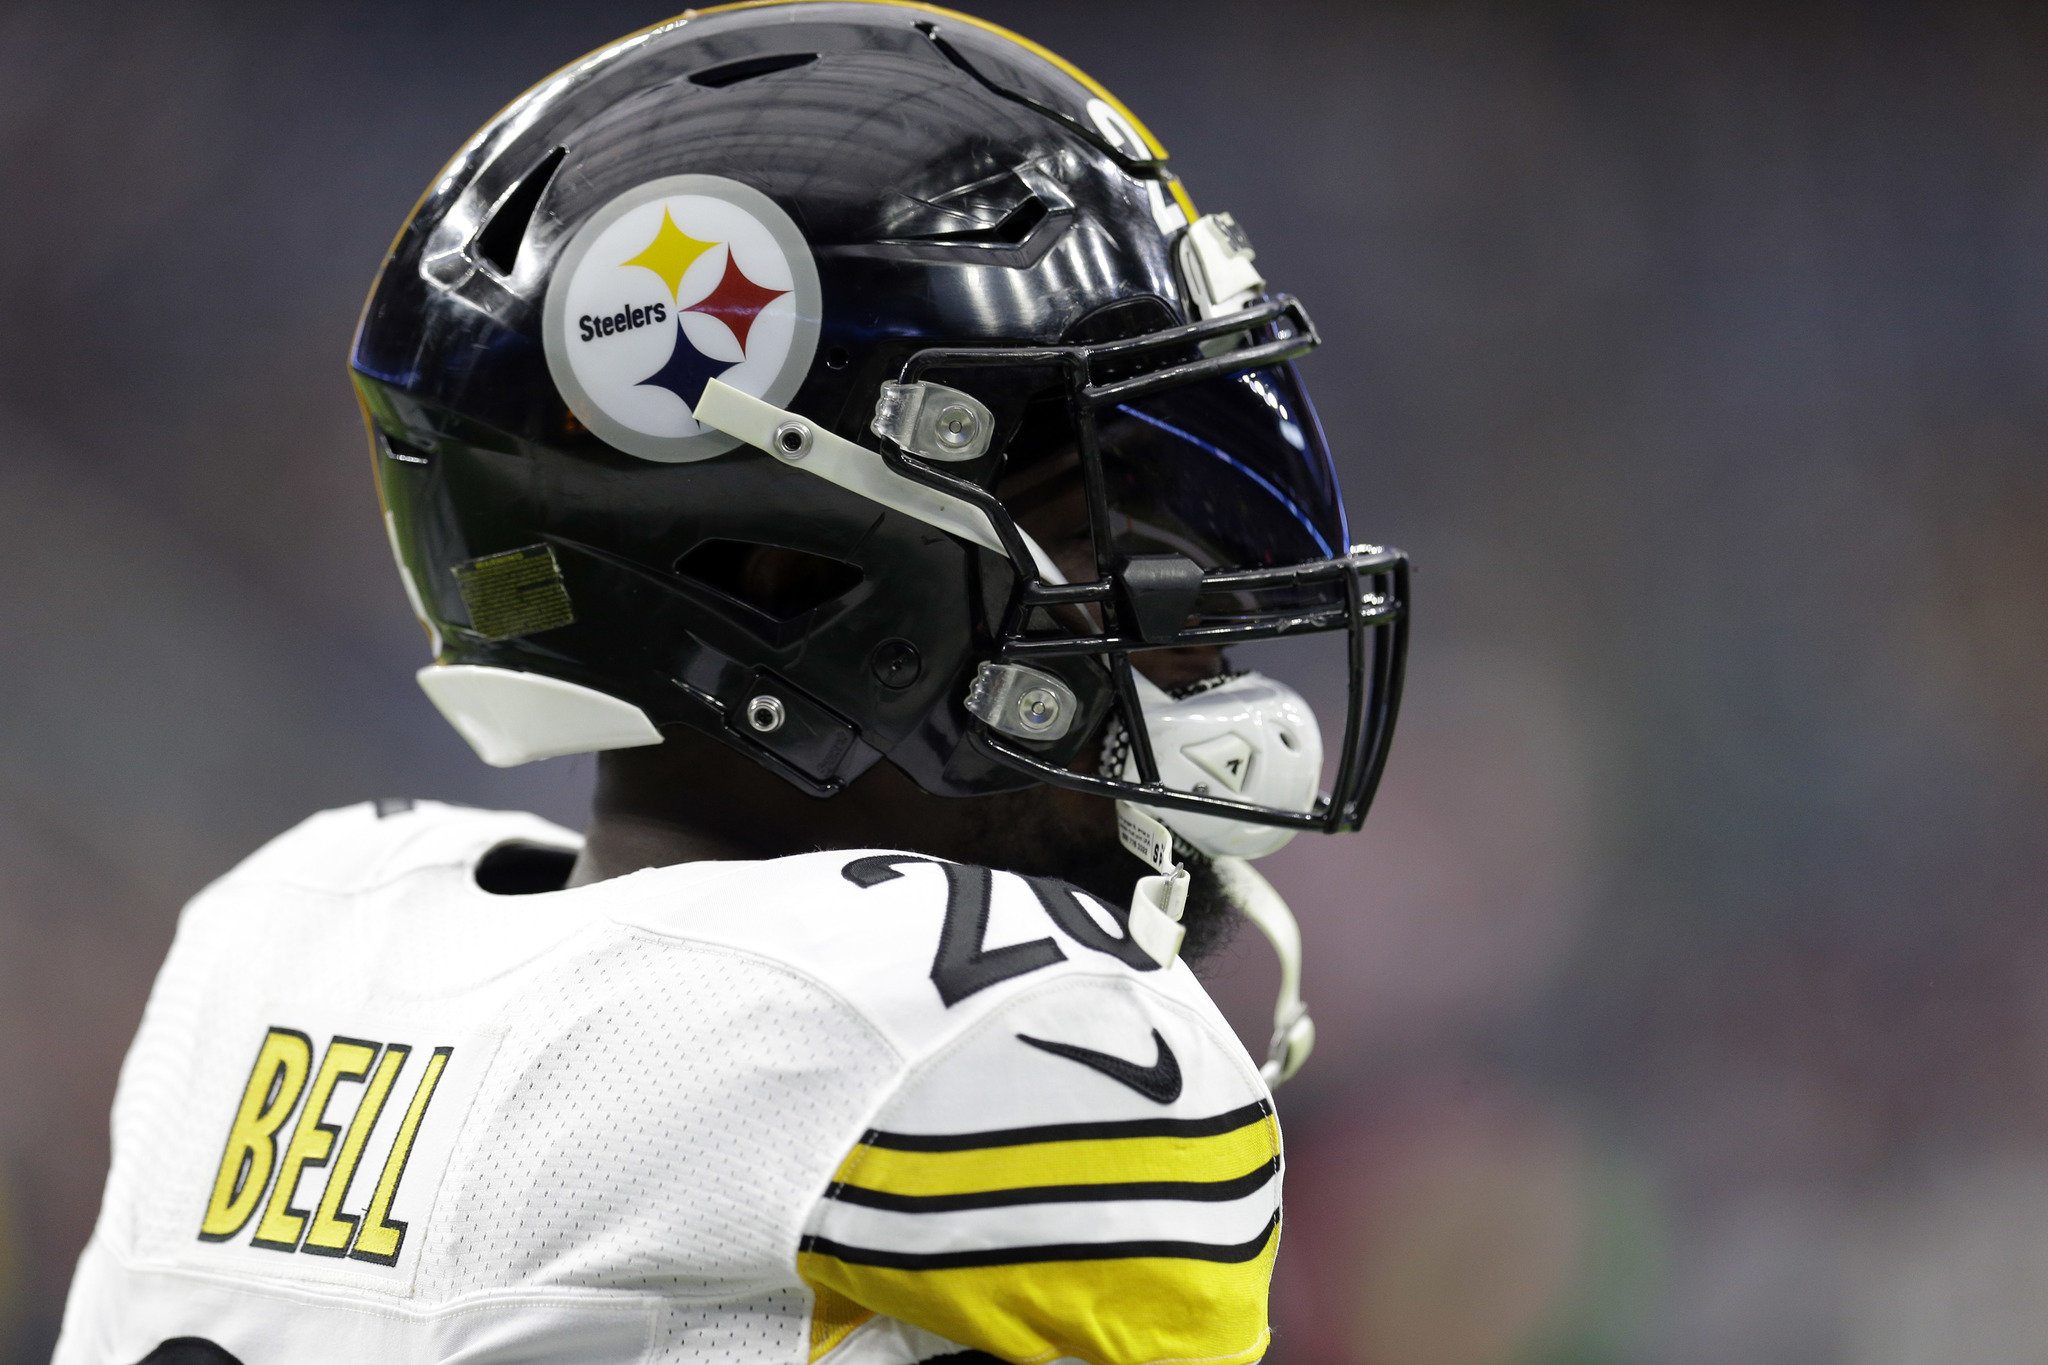 Le’Veon Bell Pittsburgh Steelers